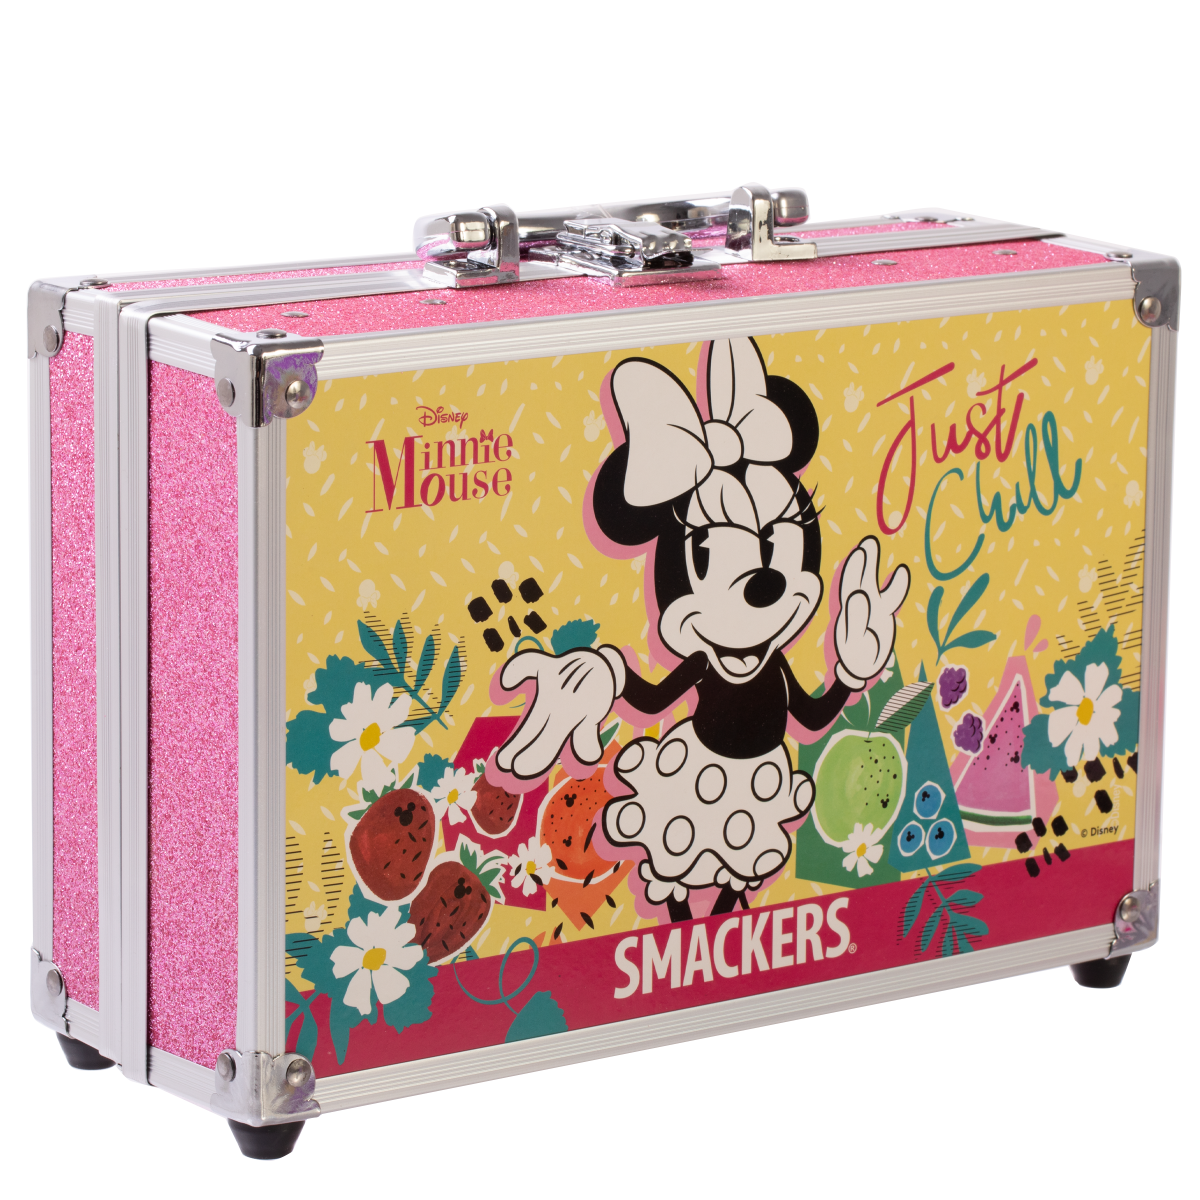 Get a Caboodles case filled with candy-themed makeup under $30